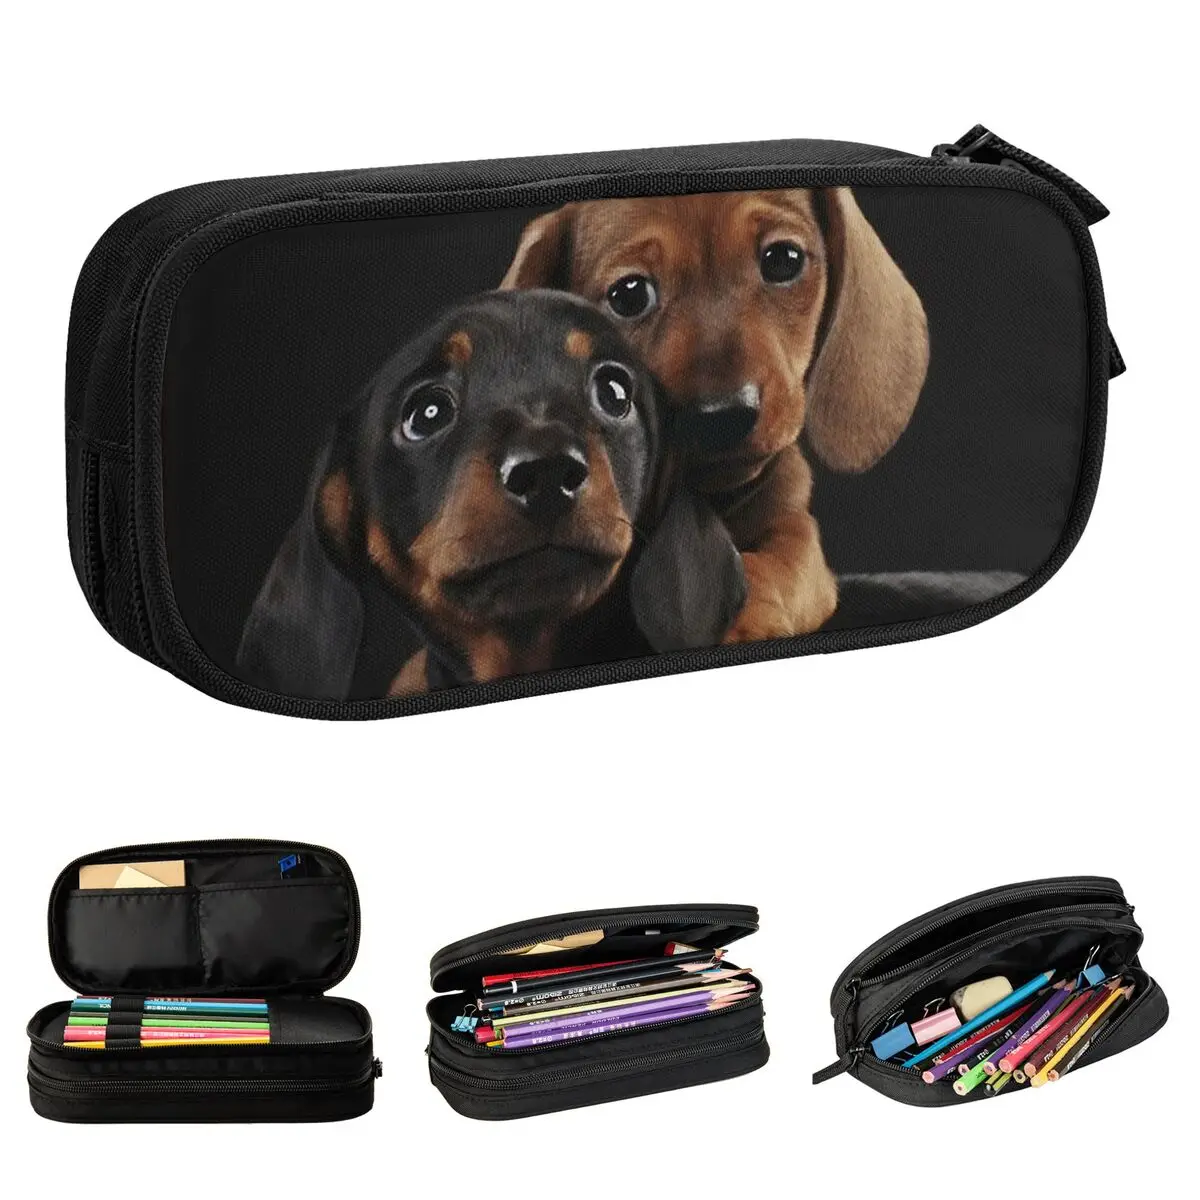 Dachshund Dog Pencil Cases Wiener Sausage Doxie Pencil Box Pen Box Kids Big Capacity Bags School Supplies Stationery